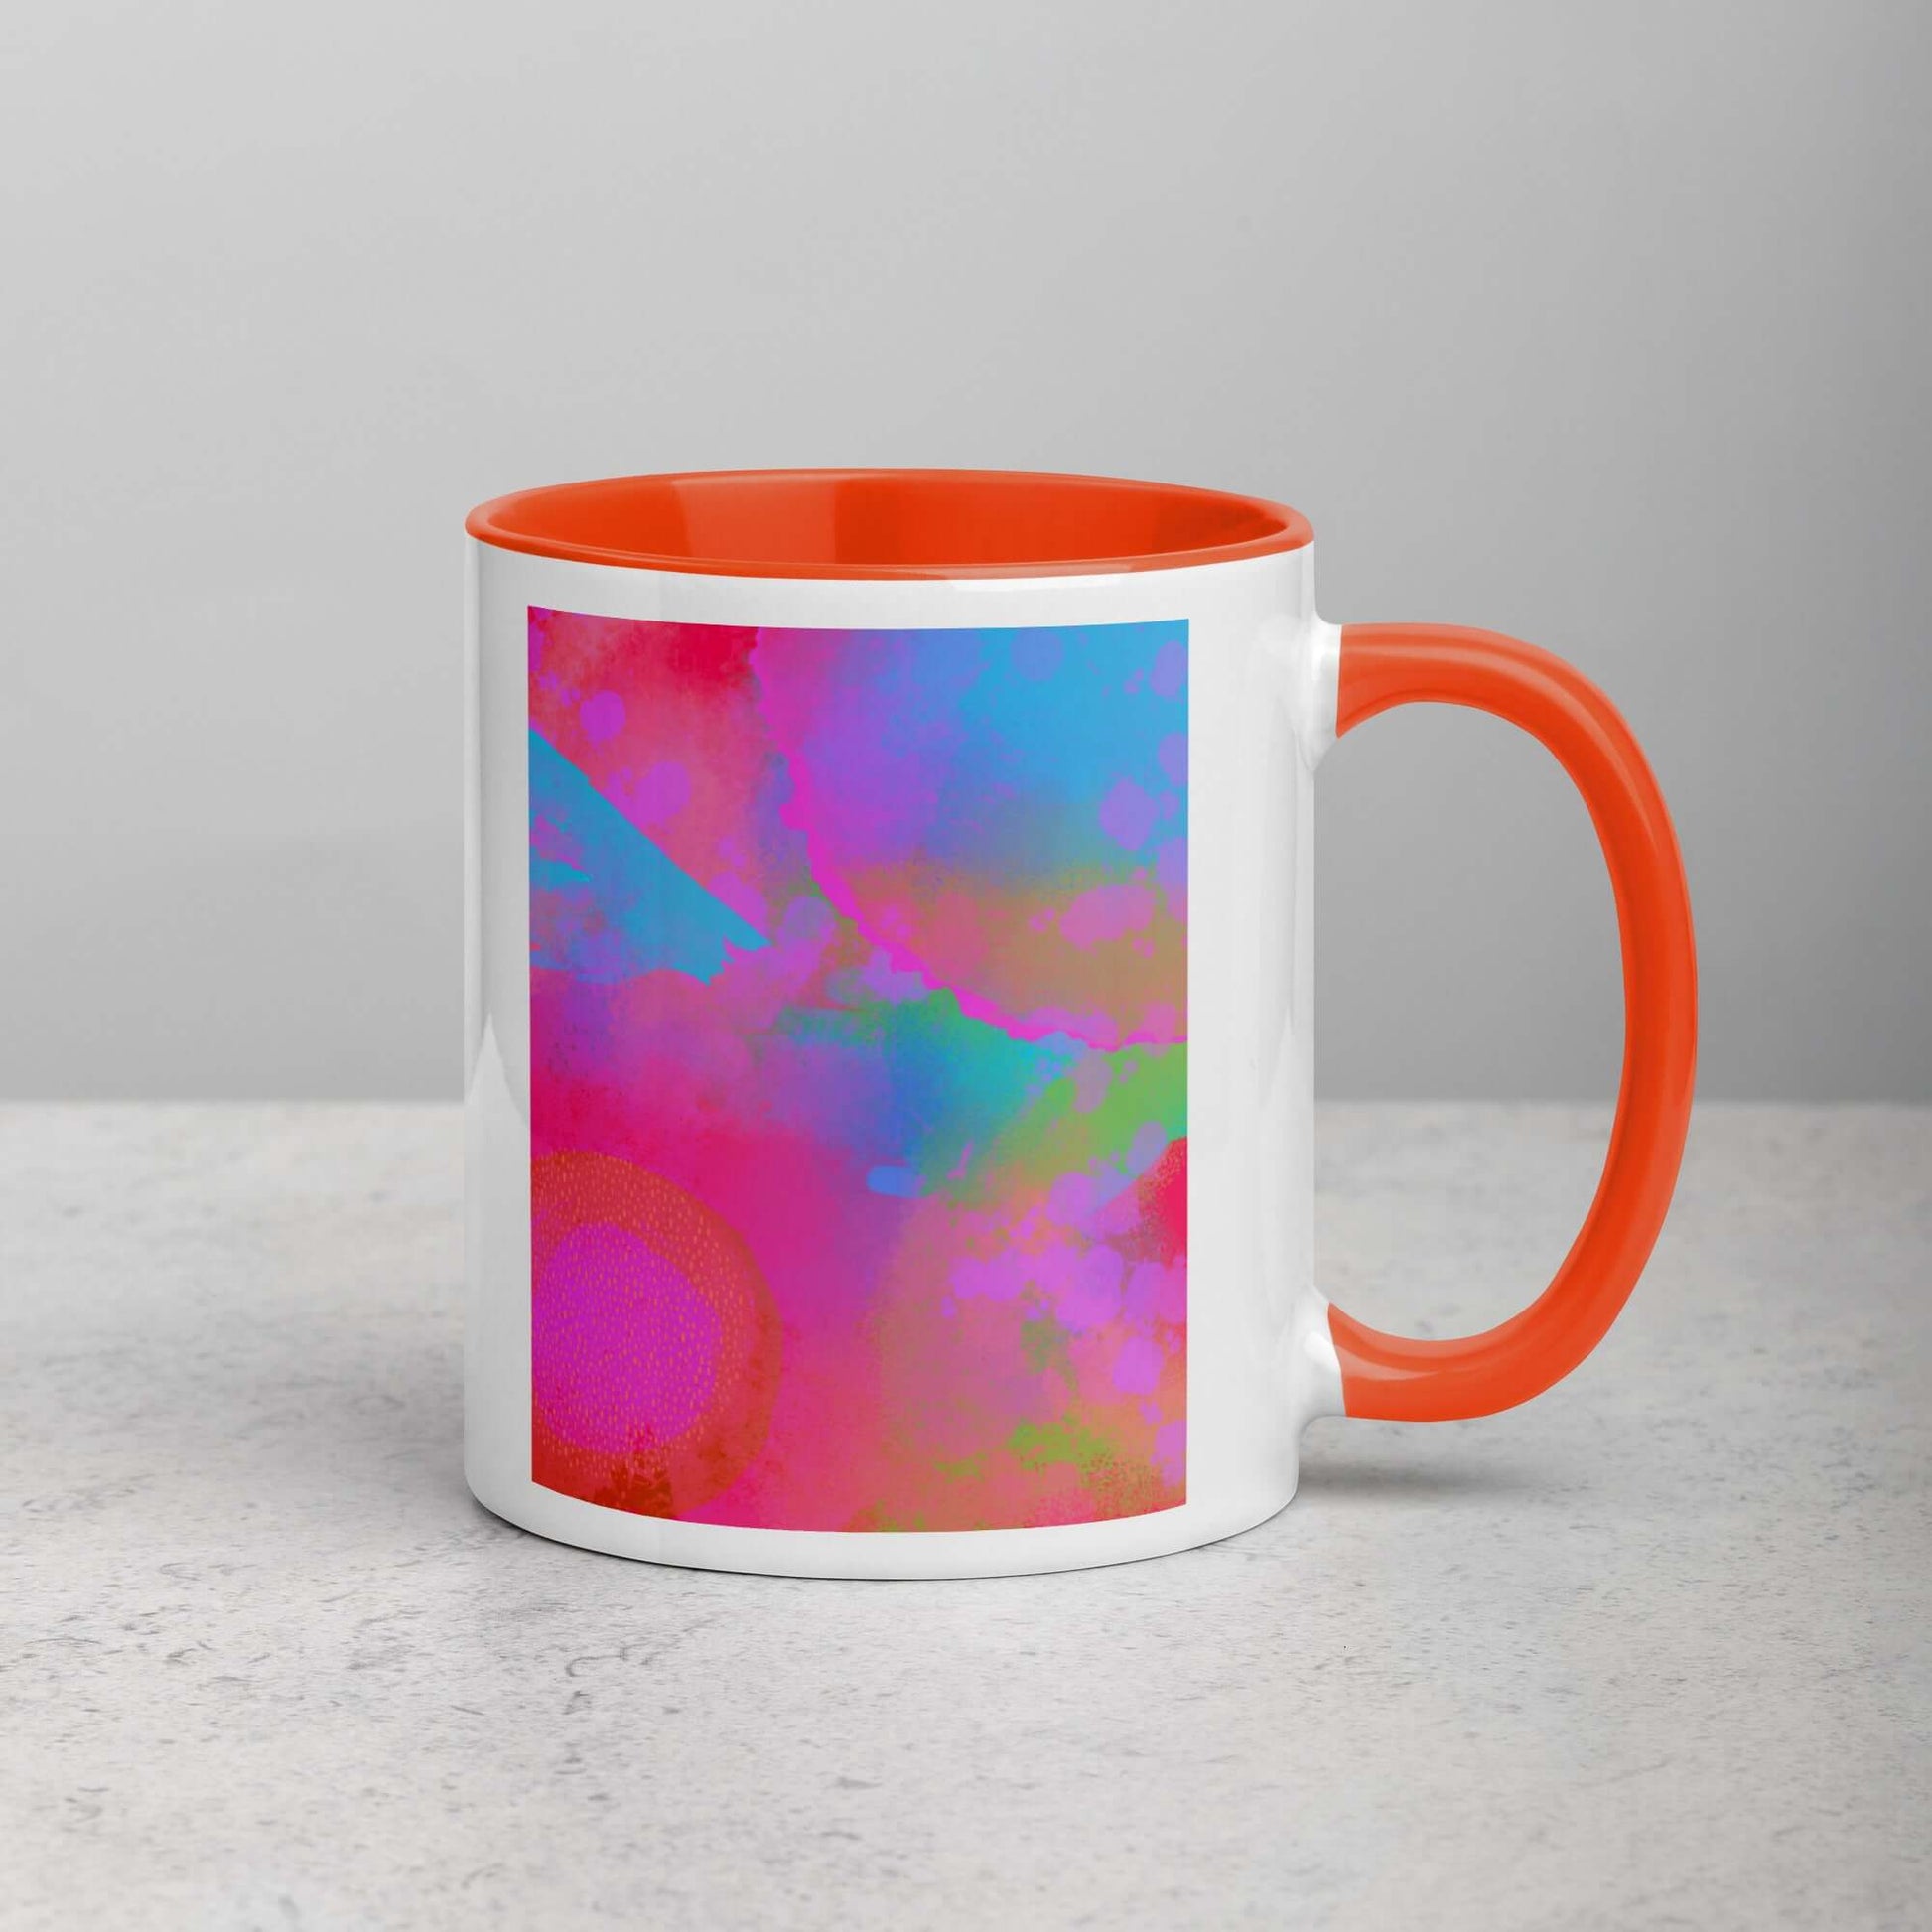 Hot Pink Intergalactic “Between Worlds” Abstract Art Mug with Deep Orange Color Inside Right Handed Front View